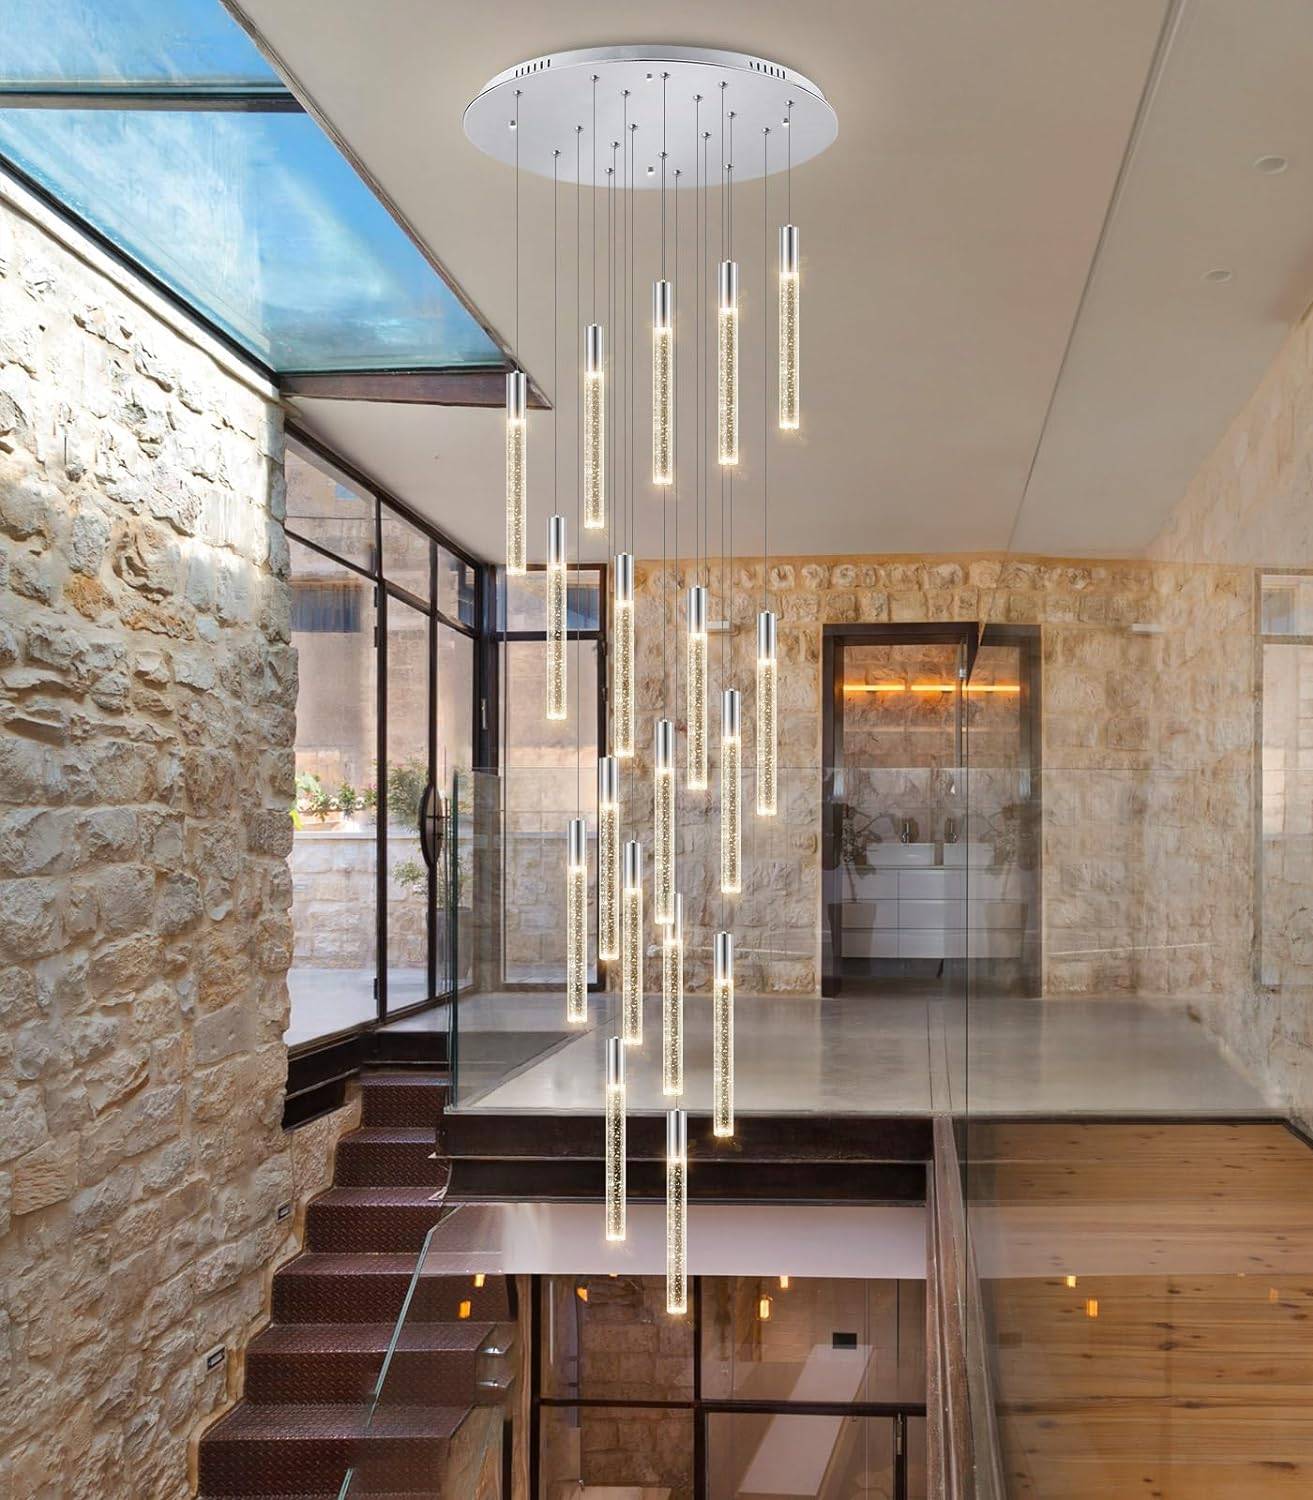 A staircase with glass lighting fixture.